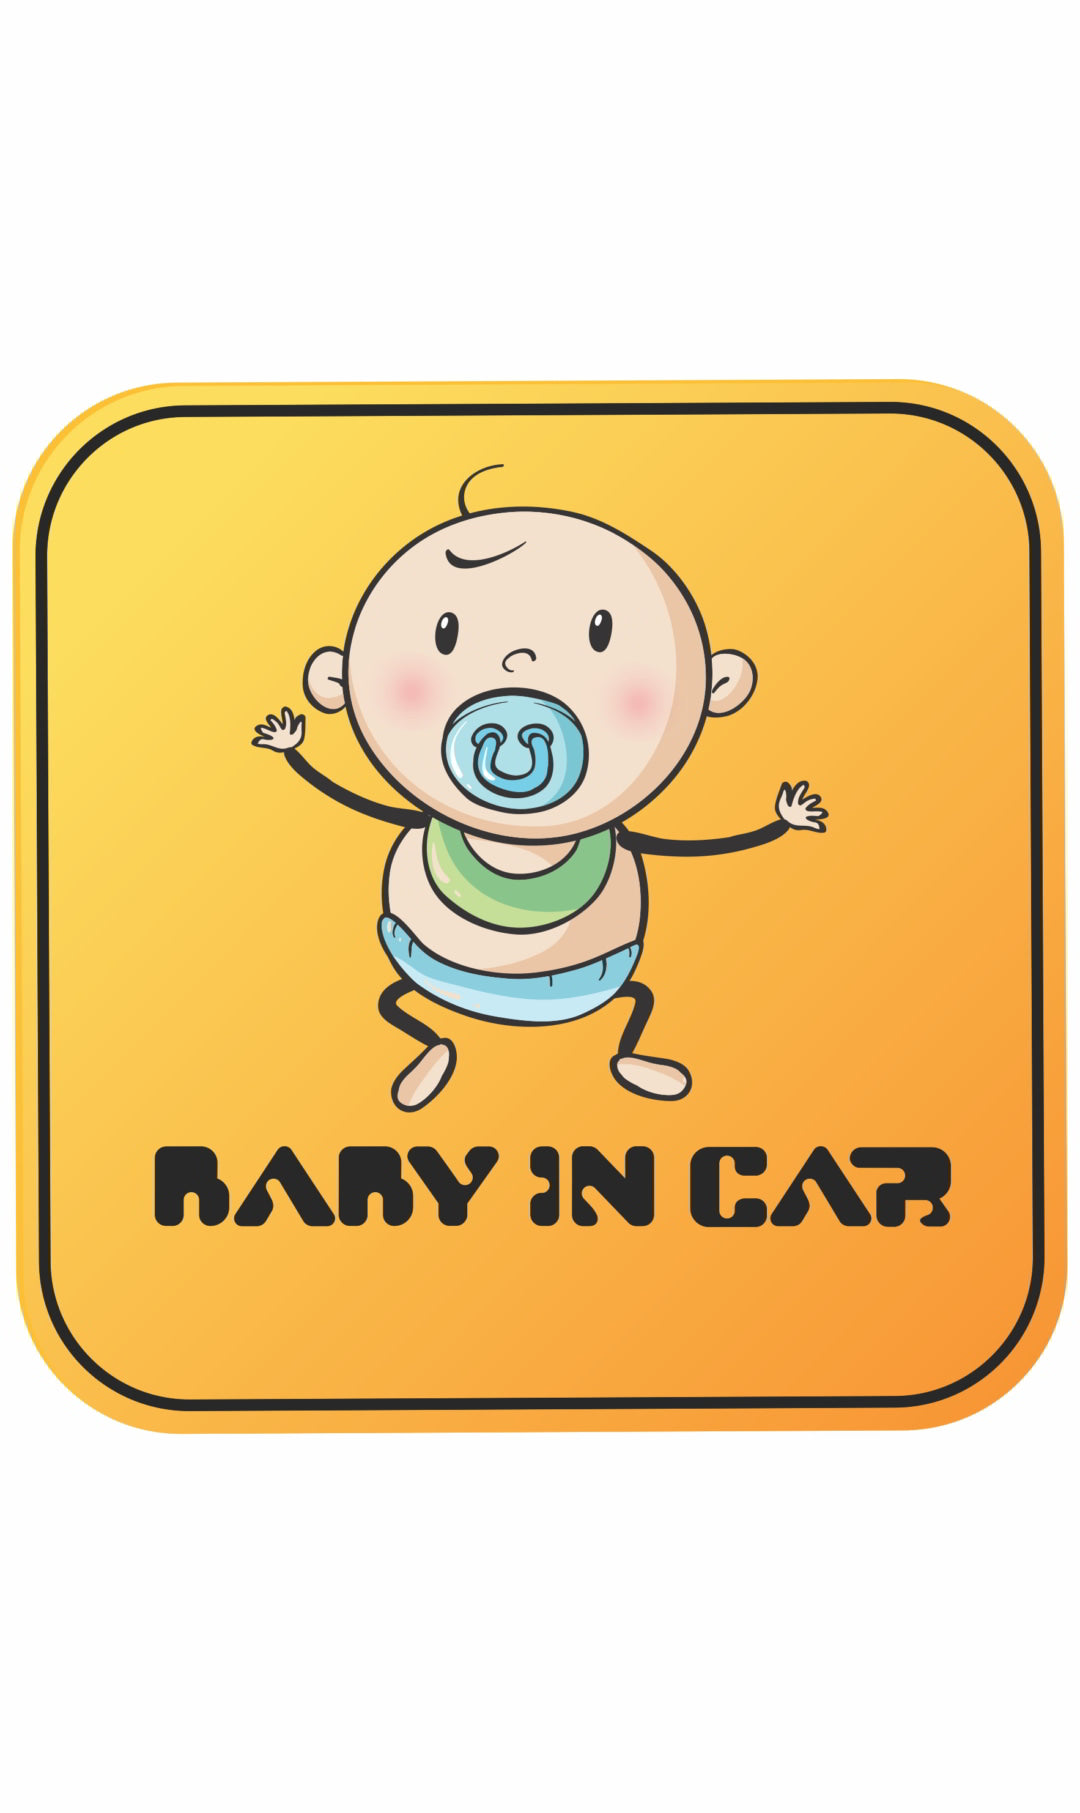 Baby in Car Sticker Decal(2pc)_c8